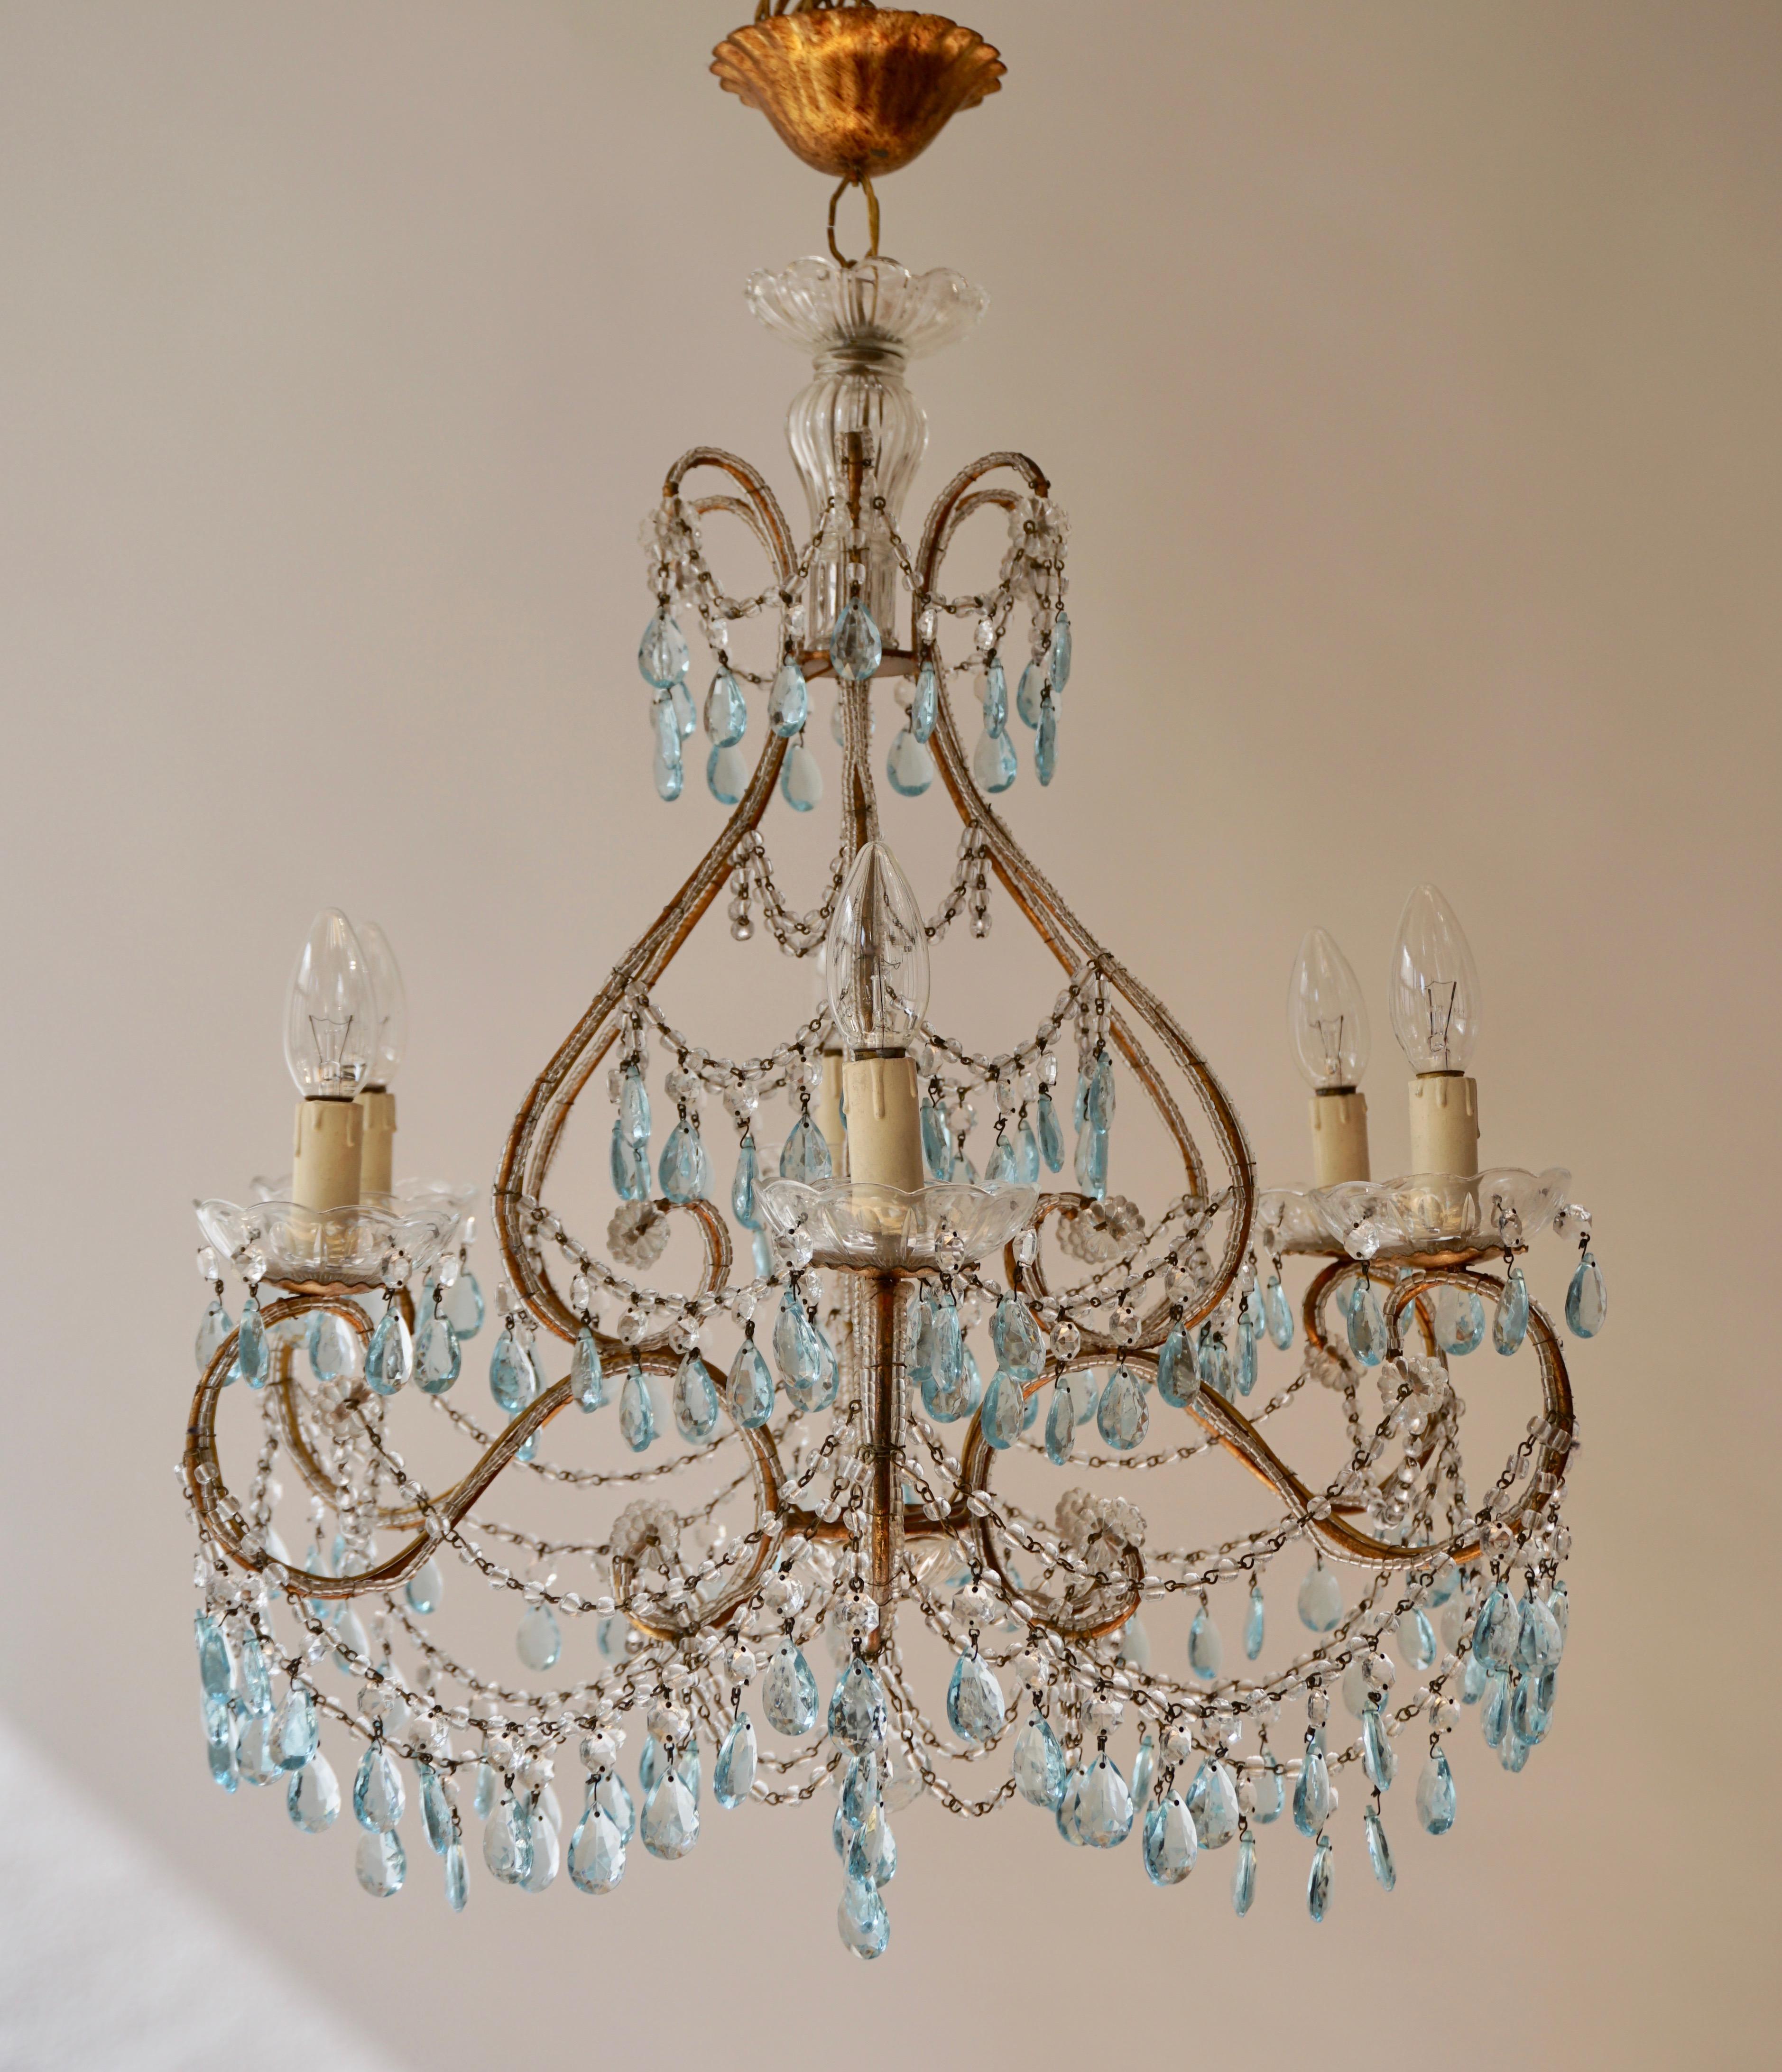 Midcentury French Marie Therese blue 6-light crystal chandelier.
Dating back to 1950s. Wired for EU.
Measures: Diameter 59 cm.
Height fixture 65 cm.
Total height 75 cm.